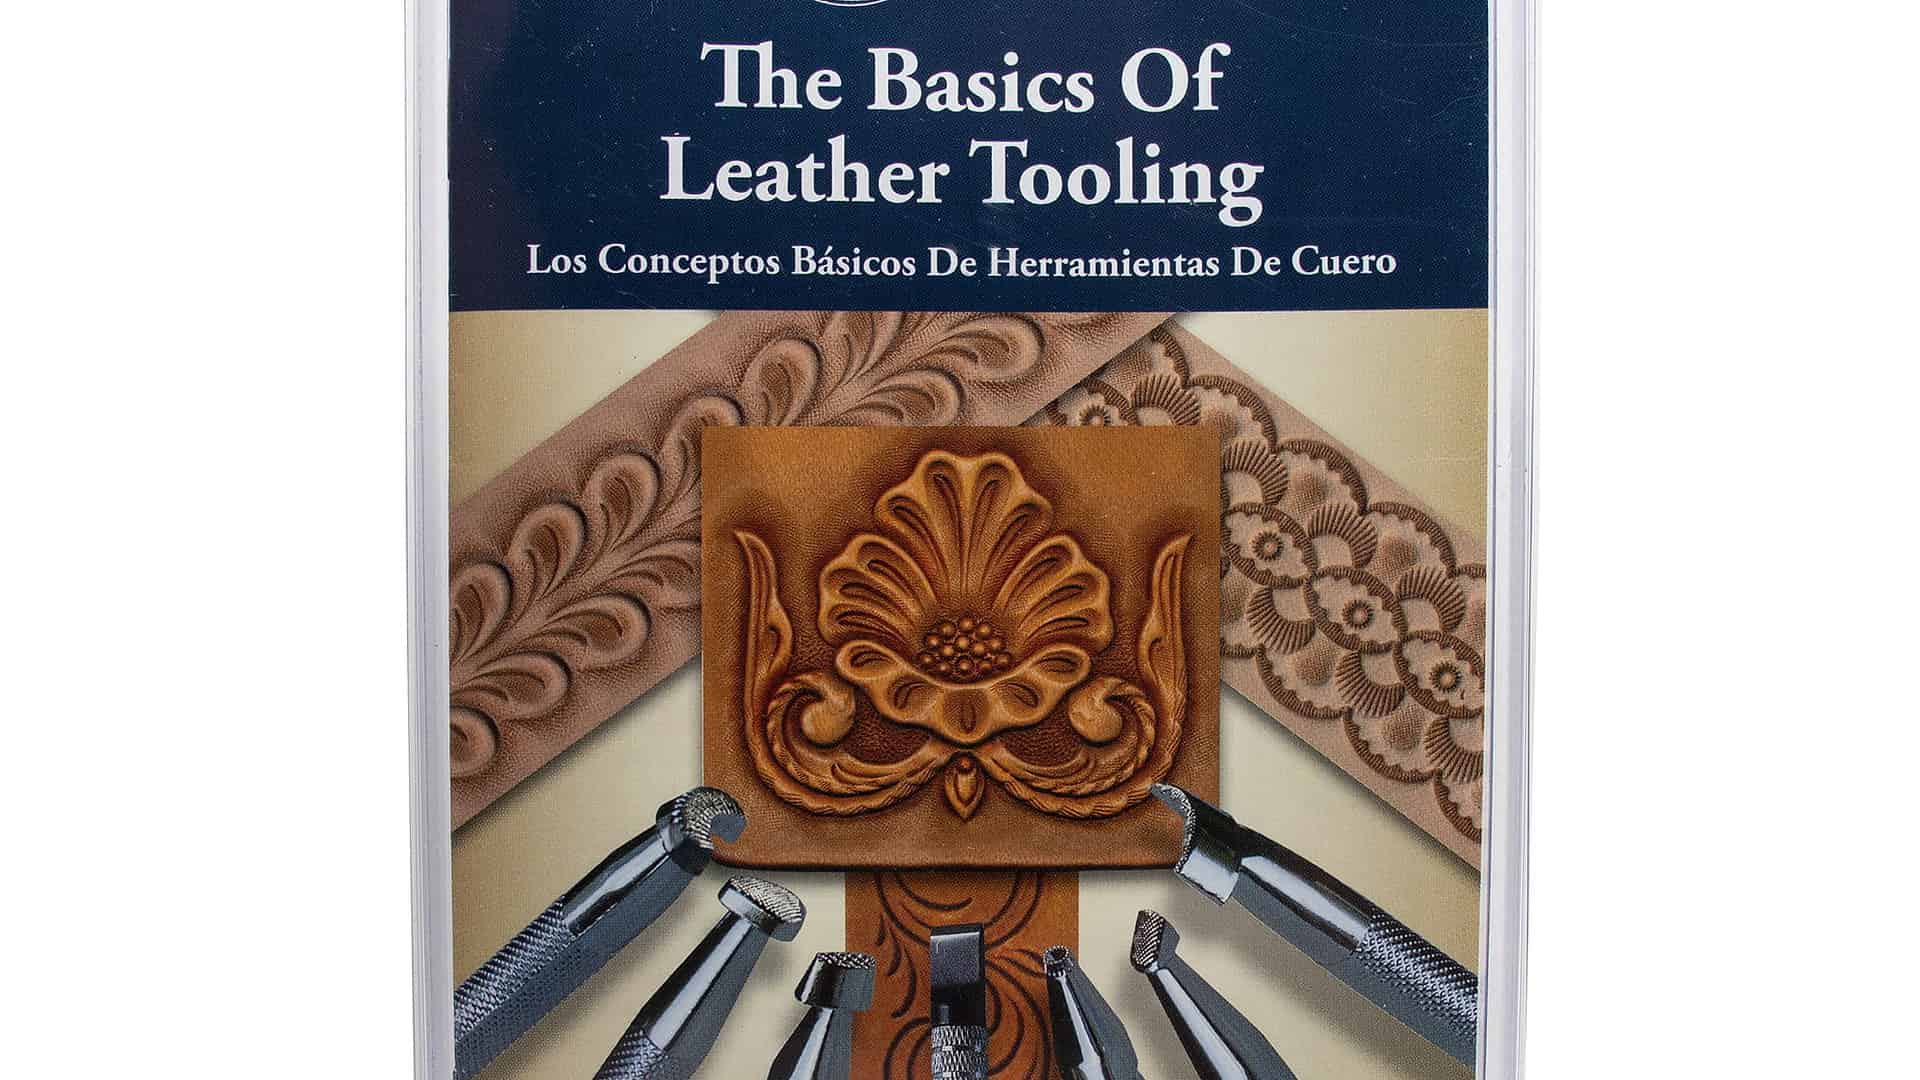 The Basics of Leather Tooling